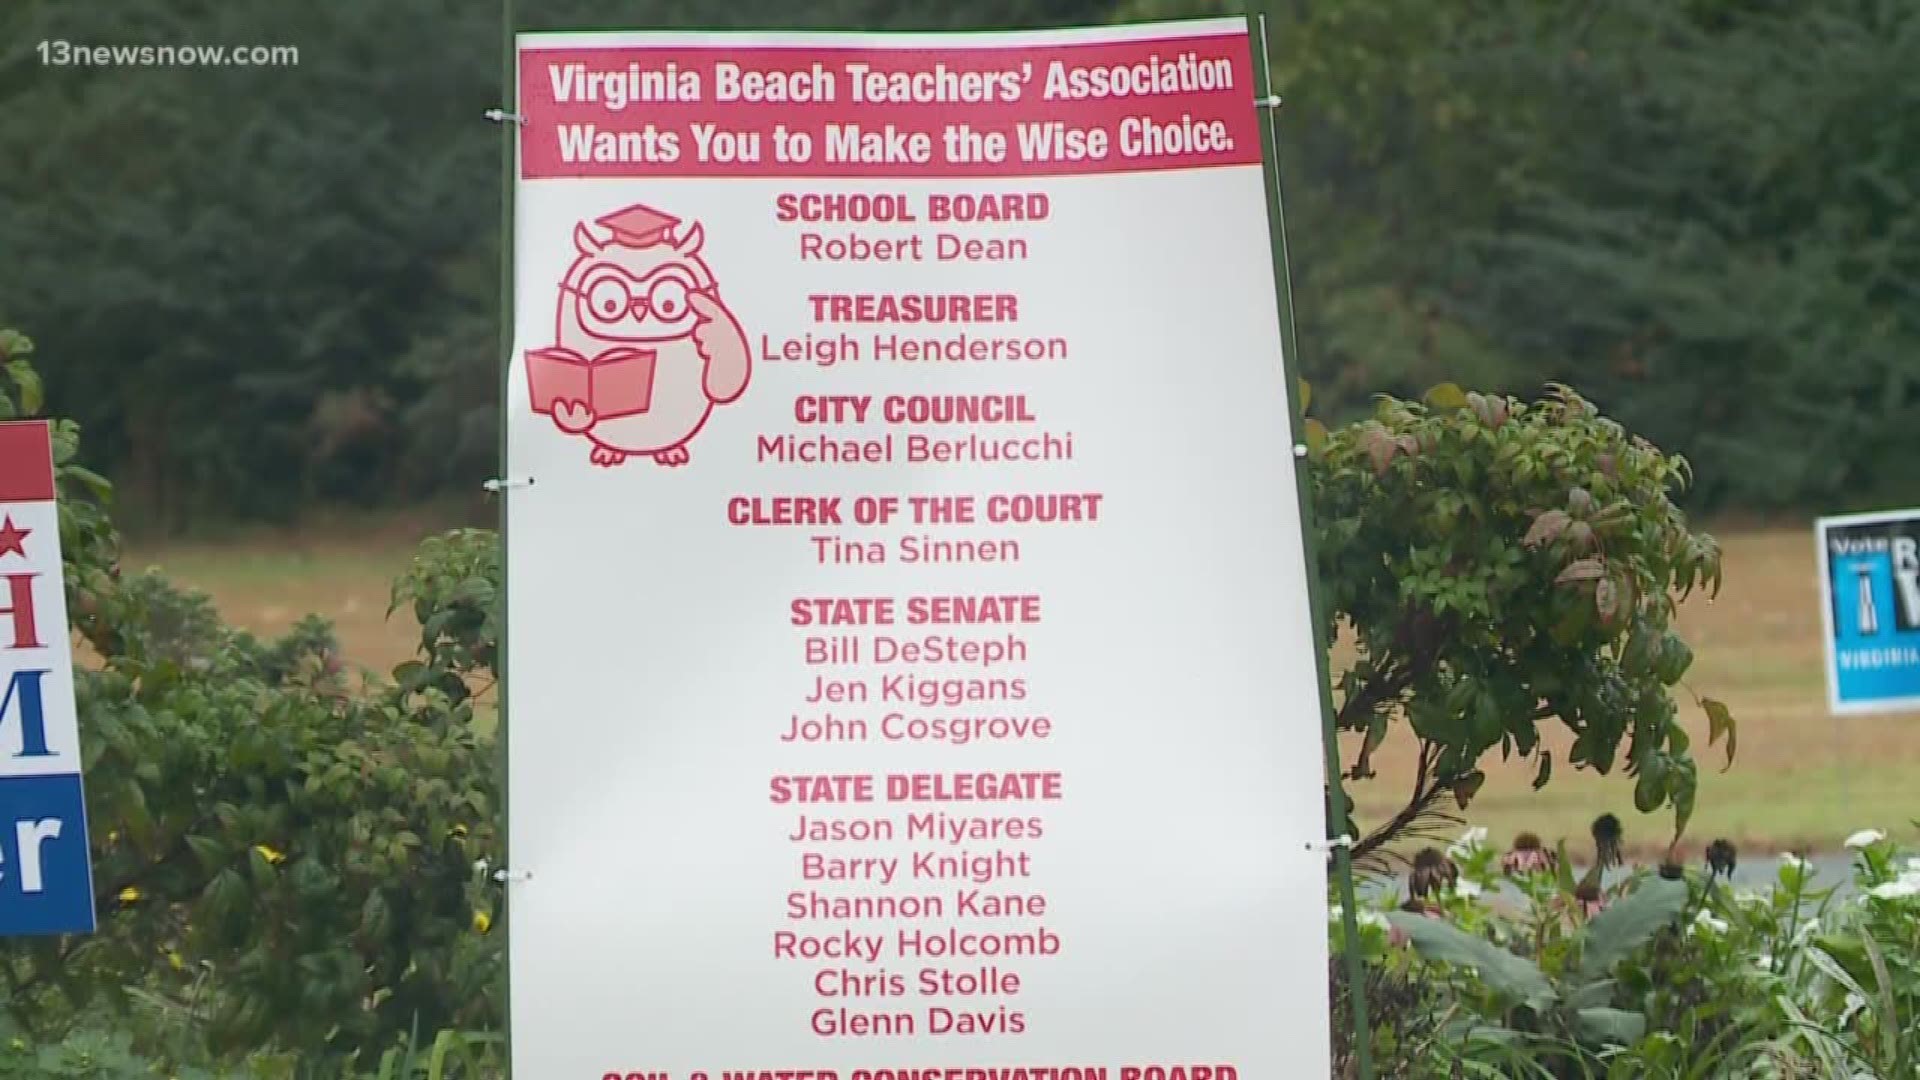 The Virginia Department of Elections is fining the Virginia Beach Teachers' Association for breaking election law.